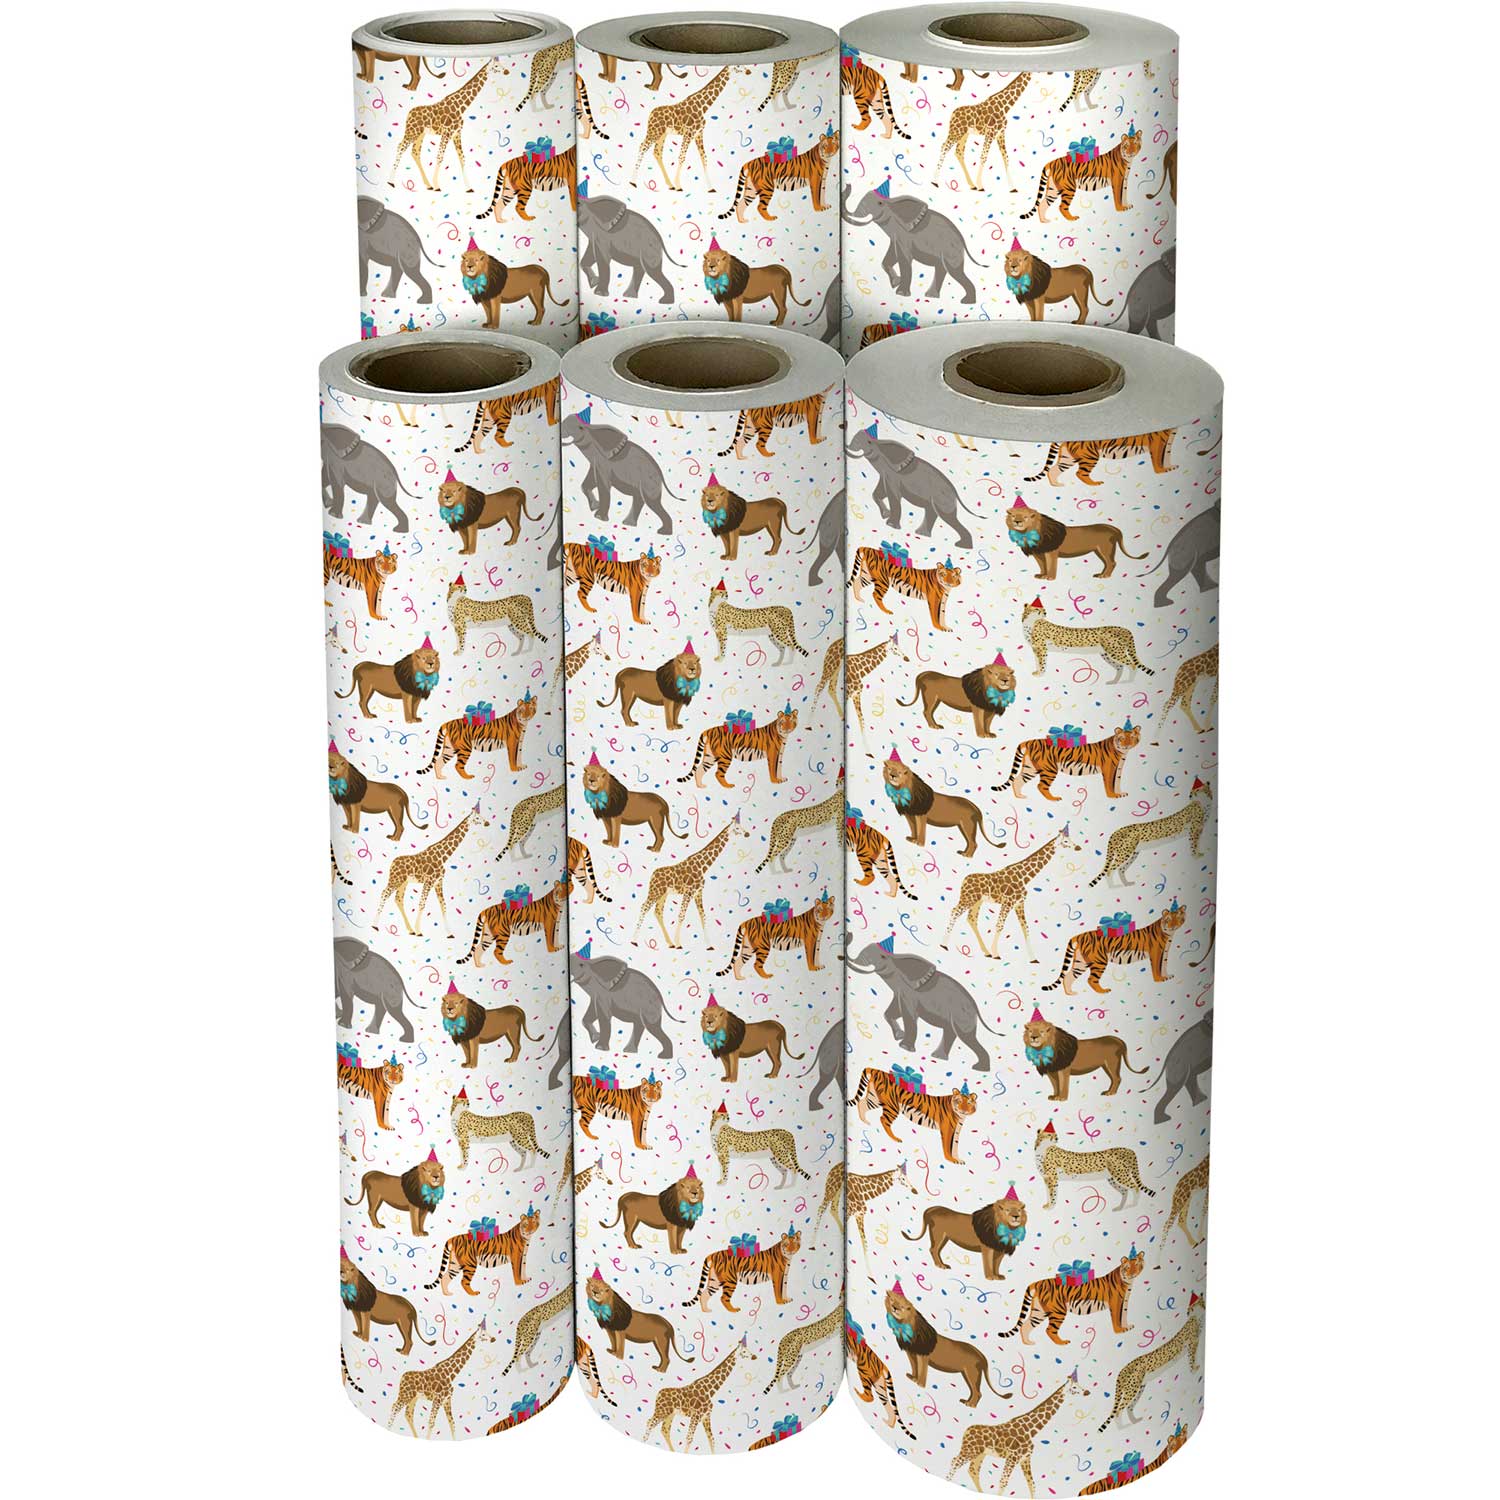 Cakesupplyshop Zoo Animals Lion Elephant Giraffe Baby Shower Gift Wrap Wrapping Paper 12ft Folded with Gift Tags